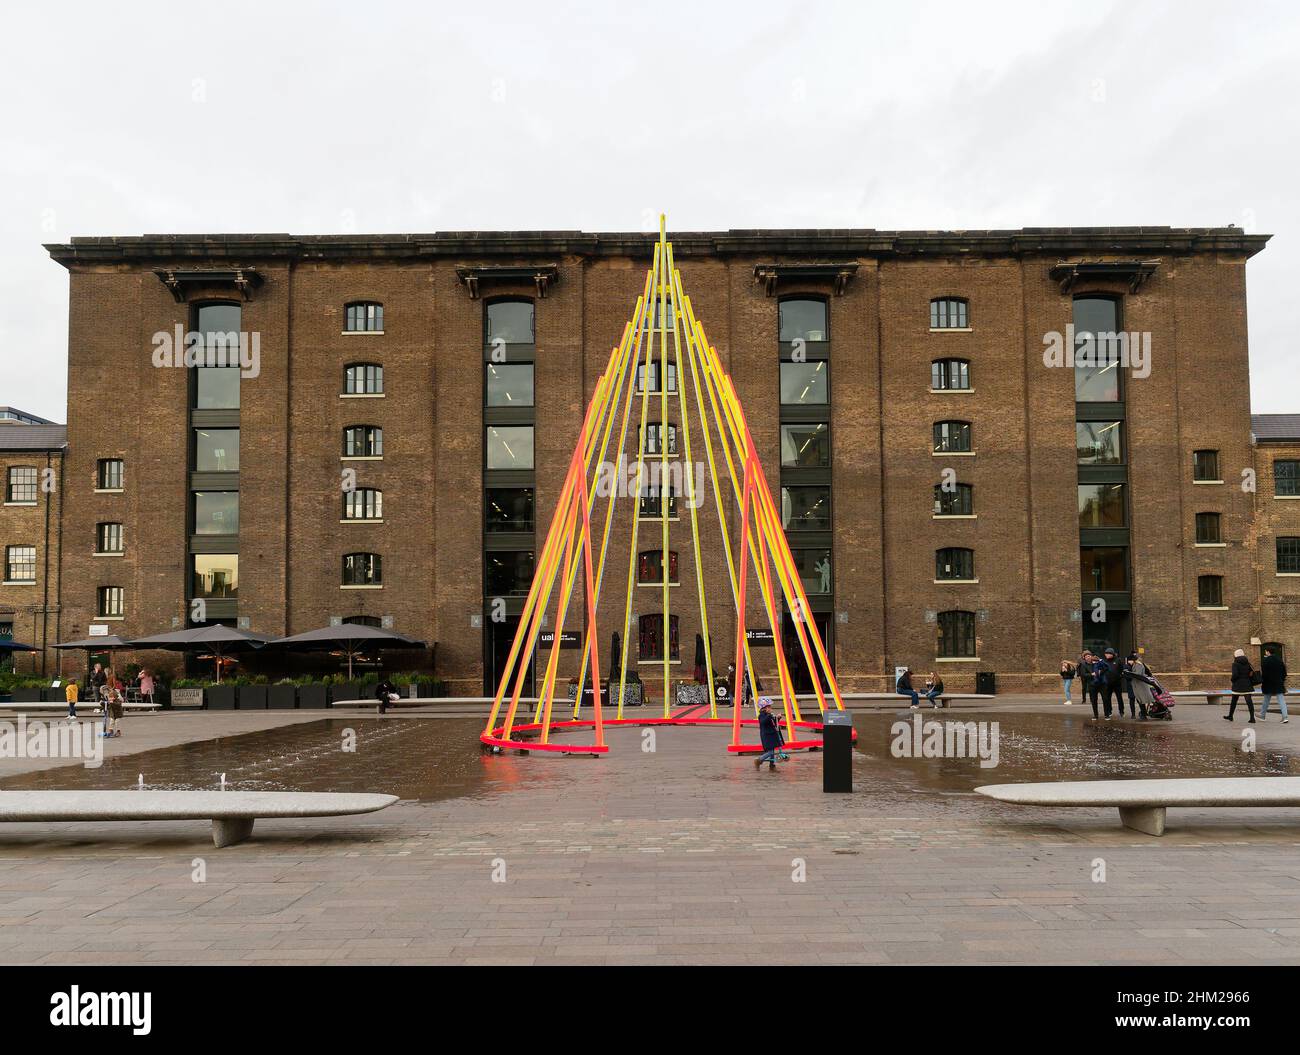 Front view of the Ual Central Saint Martins building in Granary Square London Stock Photo